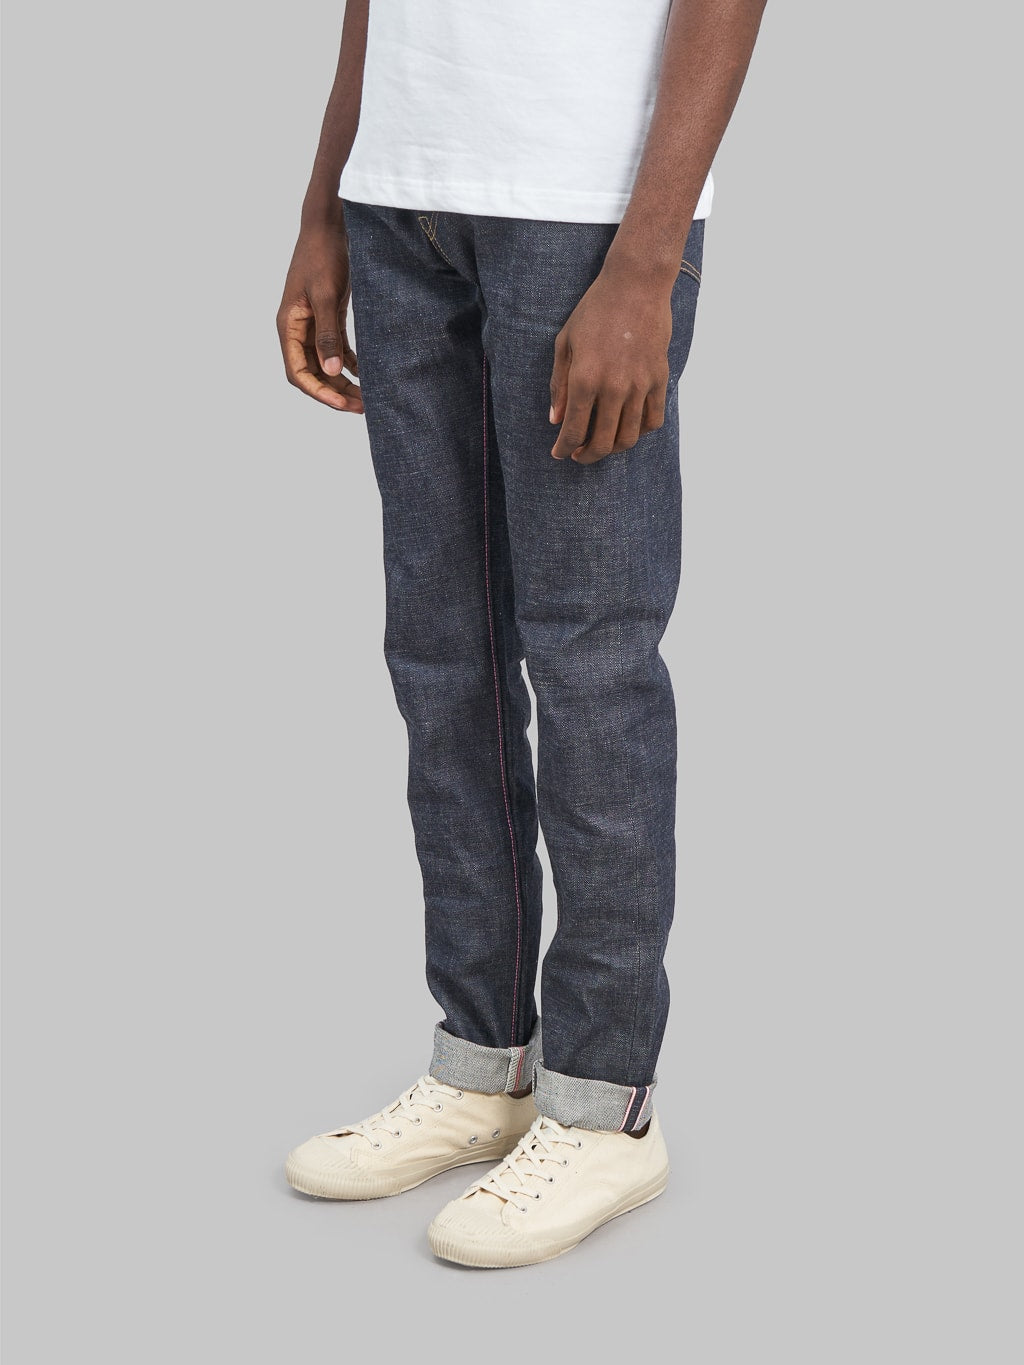 Momotaro legacy blue high tapered jeans side fit